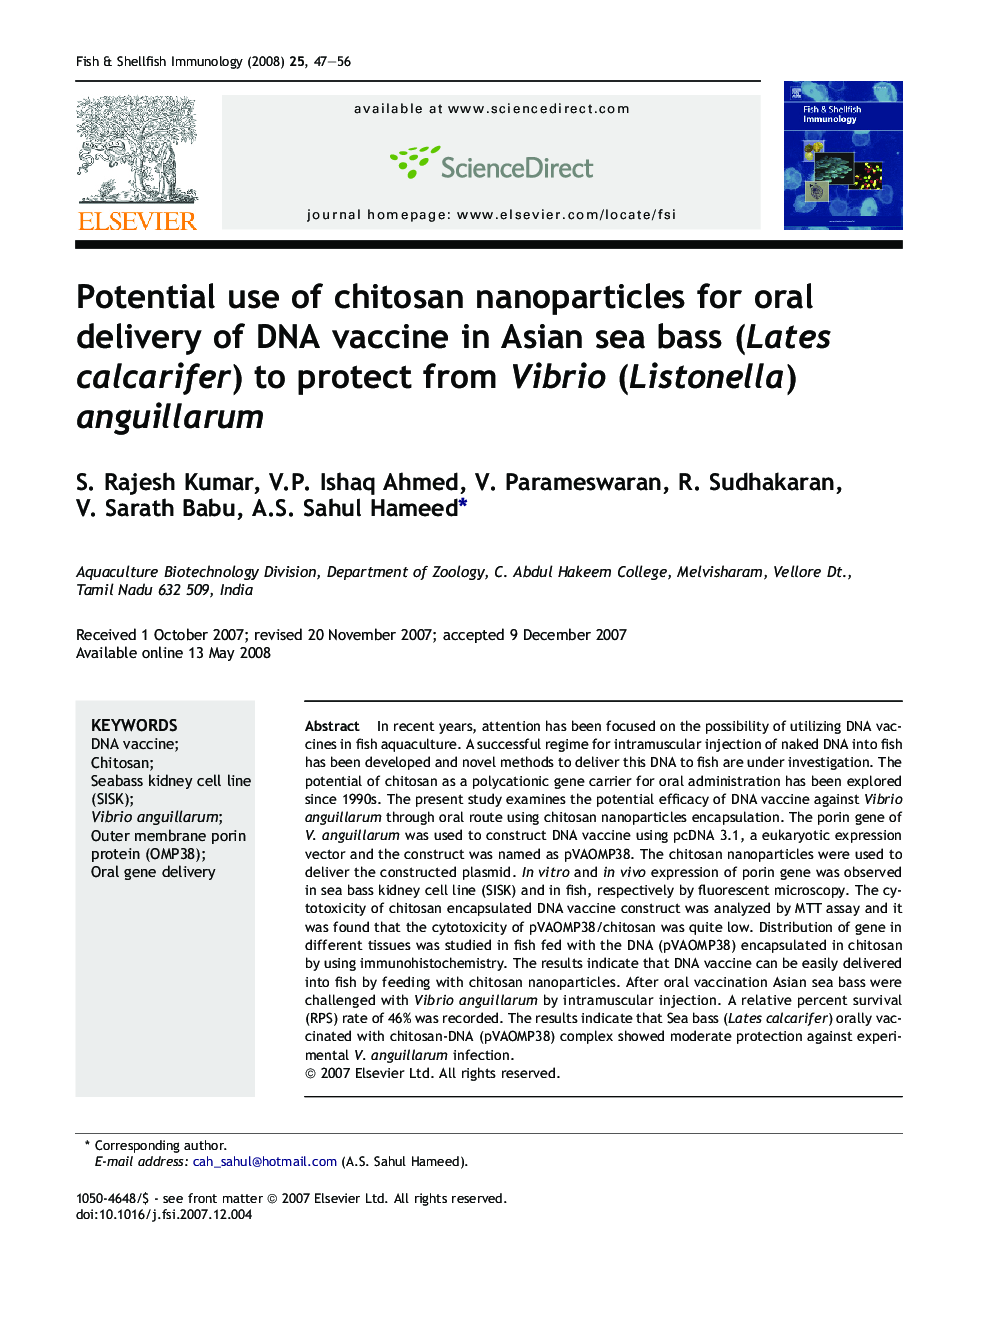 Potential use of chitosan nanoparticles for oral delivery of DNA vaccine in Asian sea bass (Lates calcarifer) to protect from Vibrio (Listonella) anguillarum